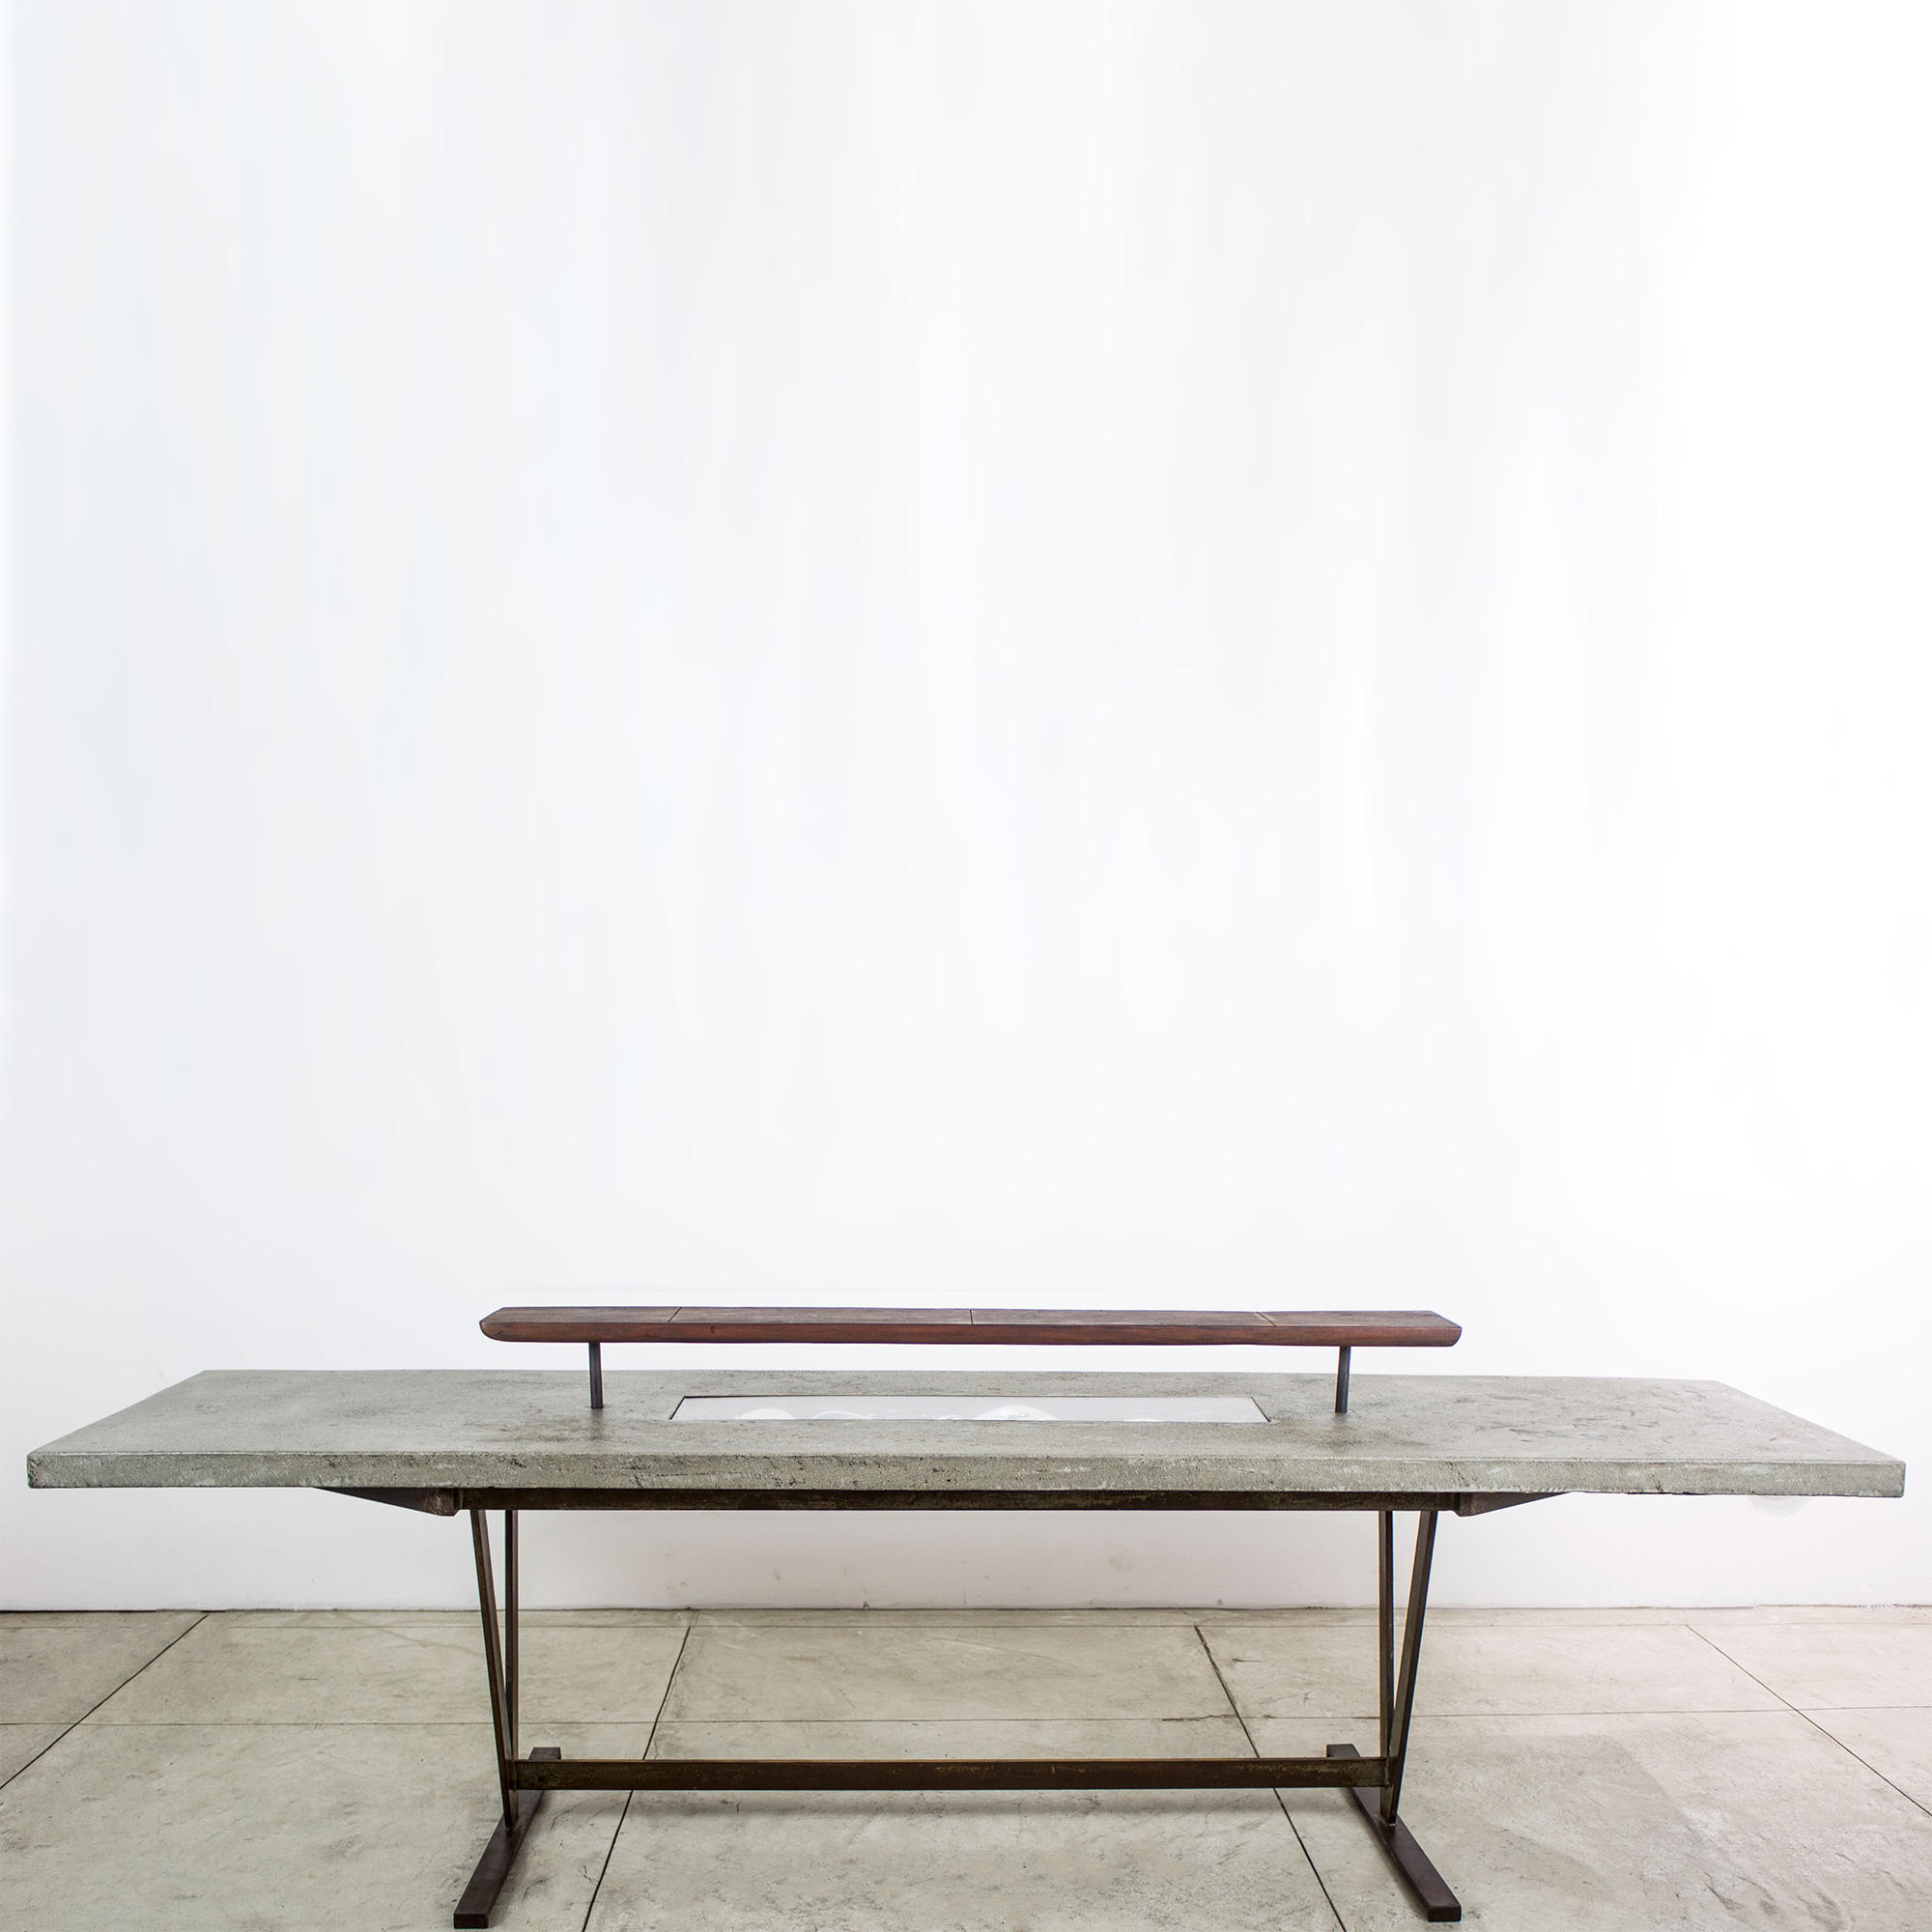 “12 guests garden table” - Metal base concrete top, electrical fixture and broken china - 28”x108”x29” - © Flavio Bisciotti